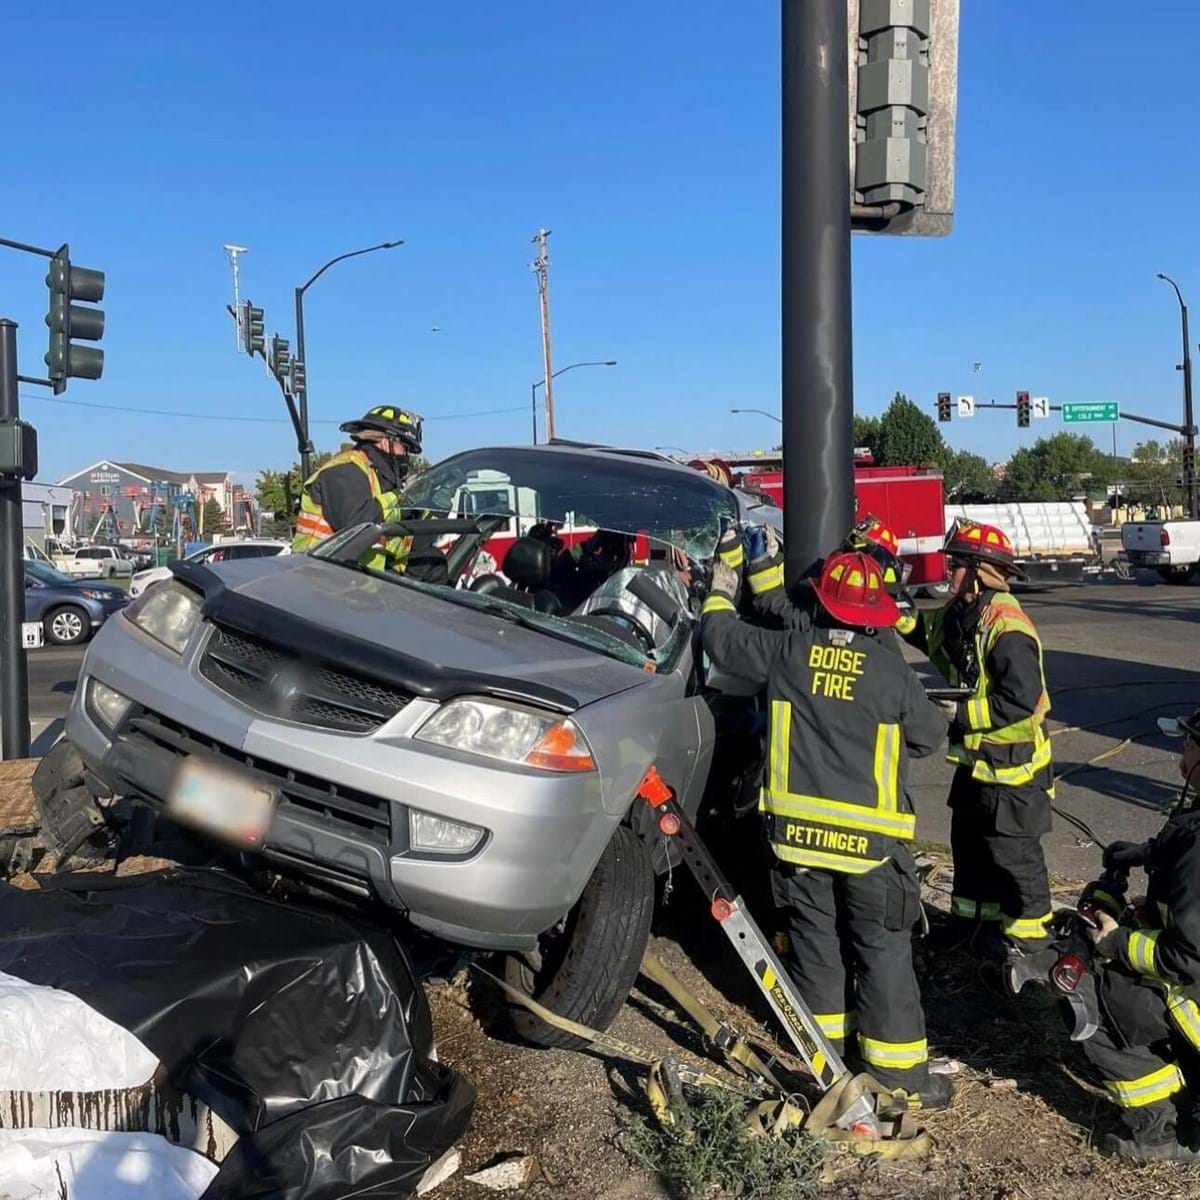 Firefighters helping at a vehicle crash.